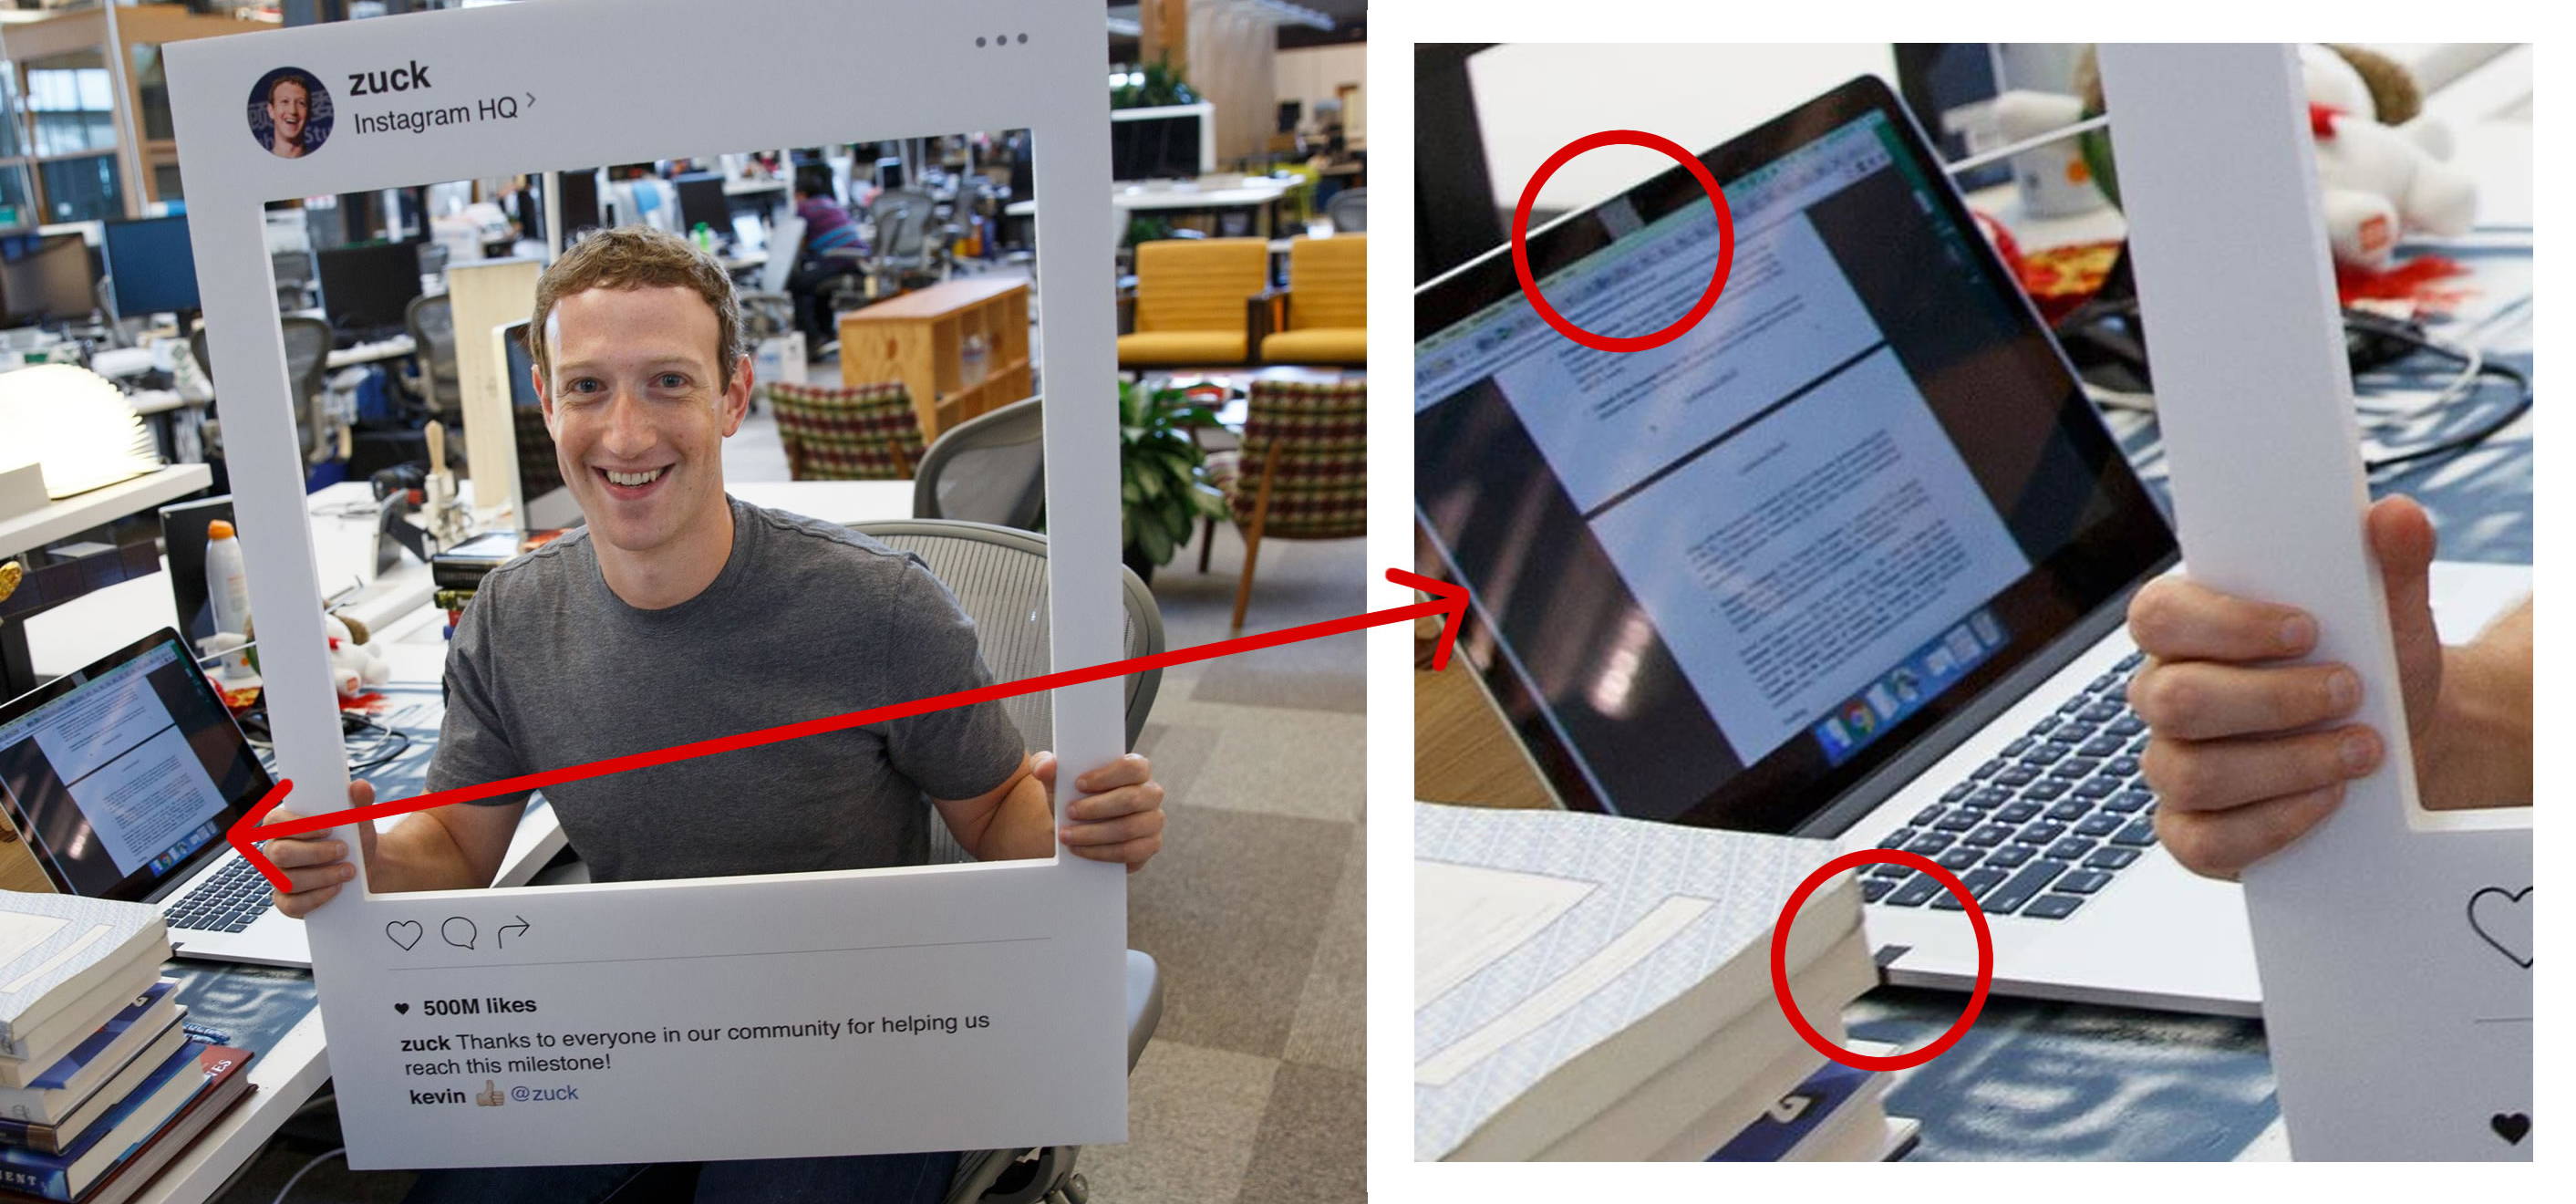 Mark Zuckerberg uses a webcam cover and so should you.